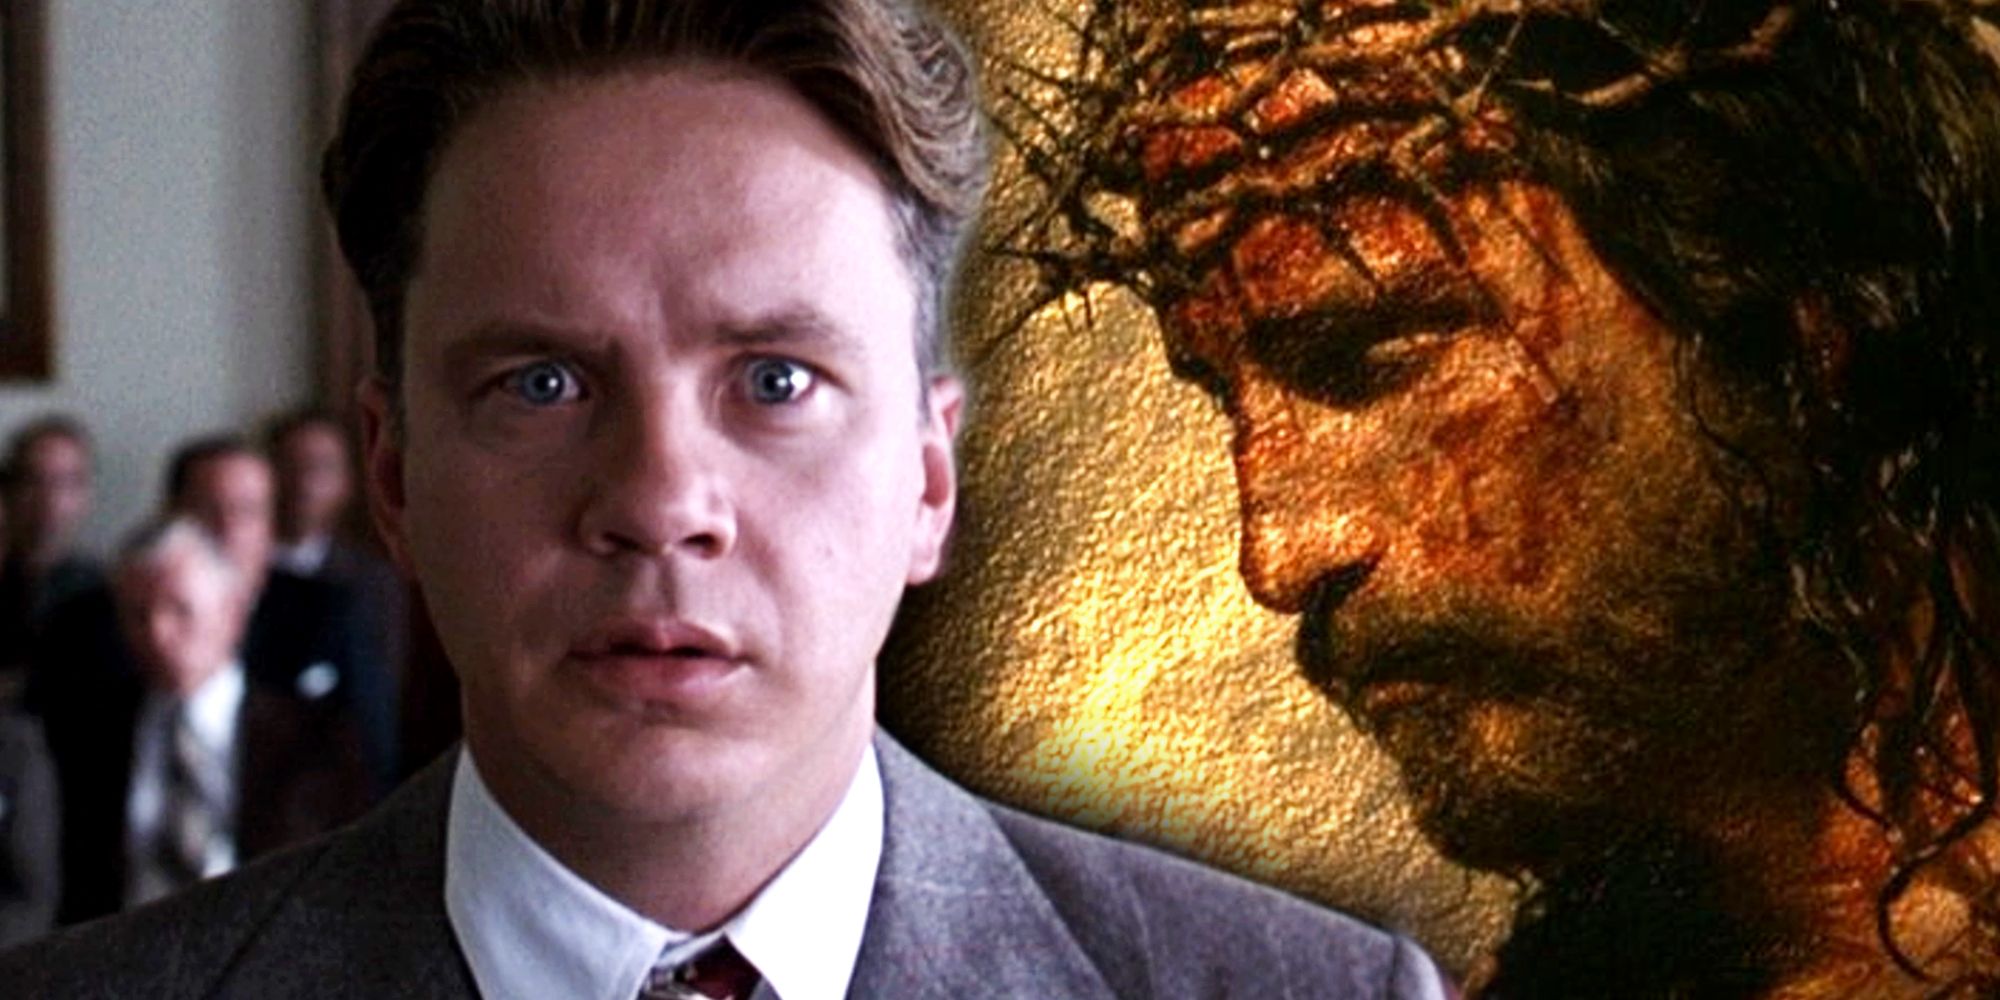 Tim Robbins as Andy Dufresne in The Shawshank Redemption and Mel Gibson's The Passion of The Christ